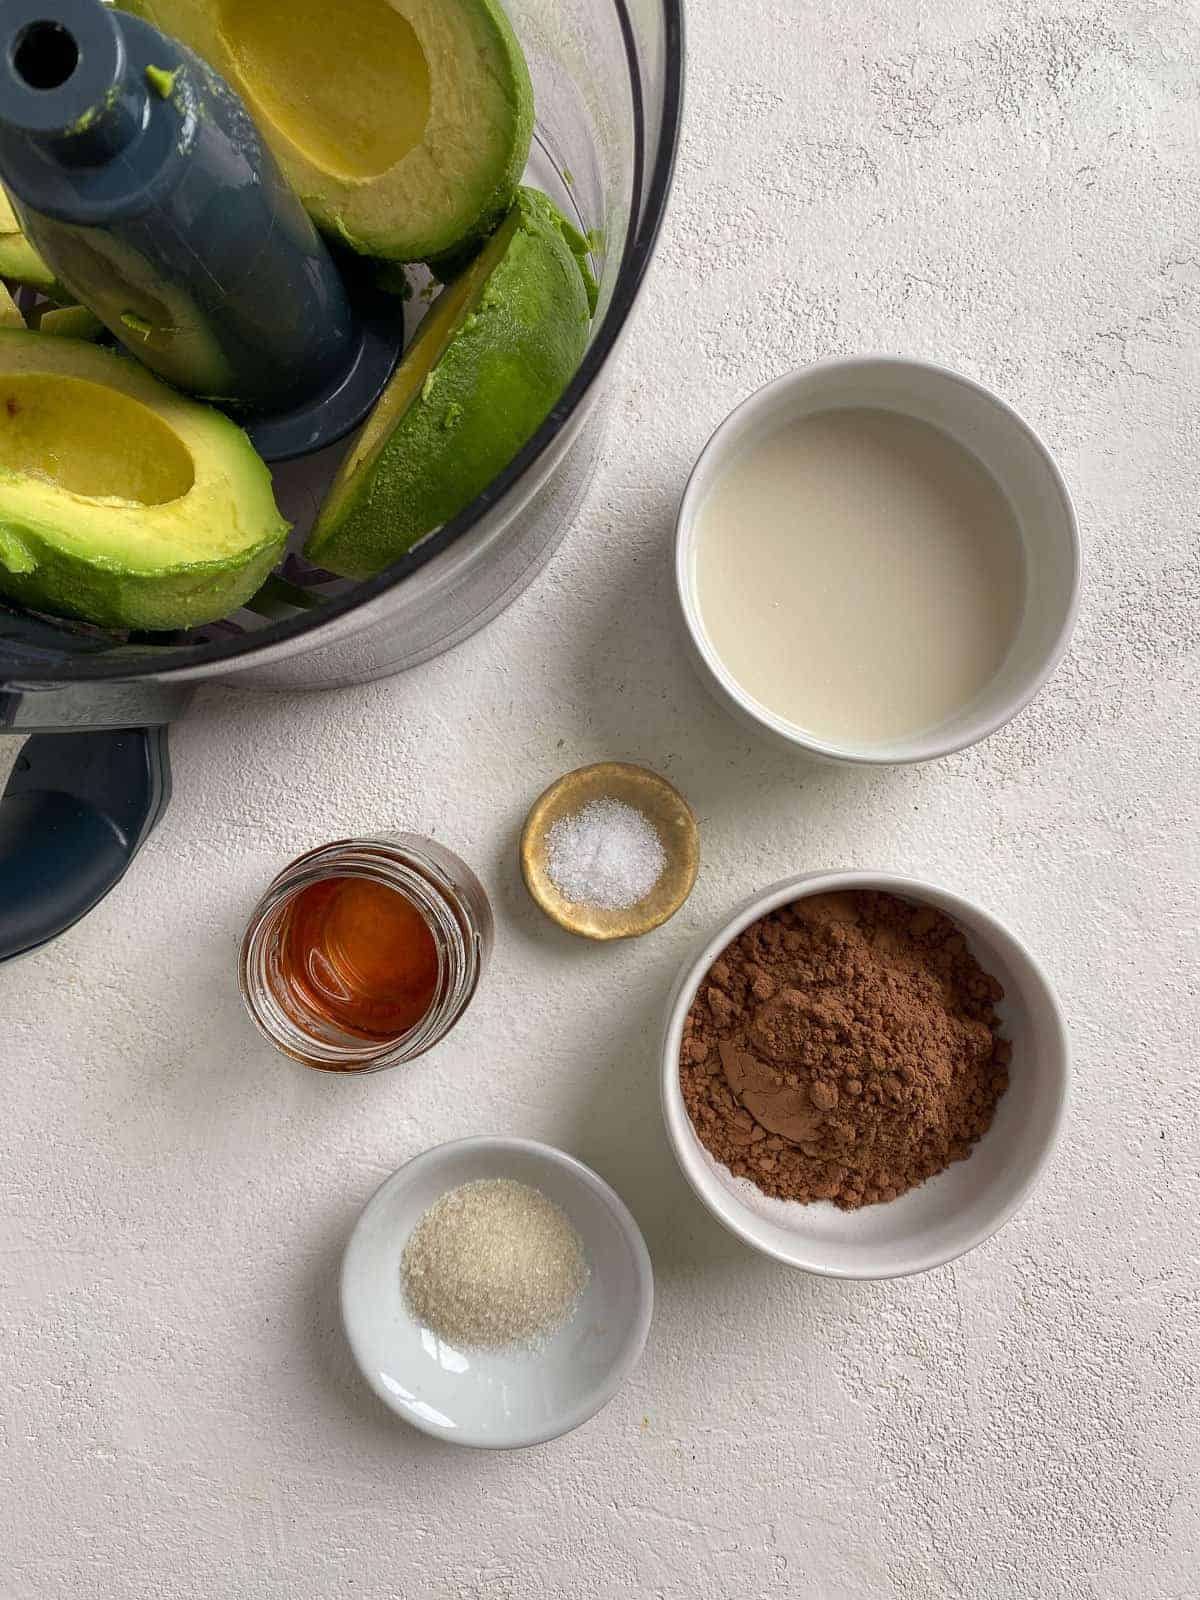 ingredients for Chocolate Avocado Pudding against a white background with avocados in a bowl